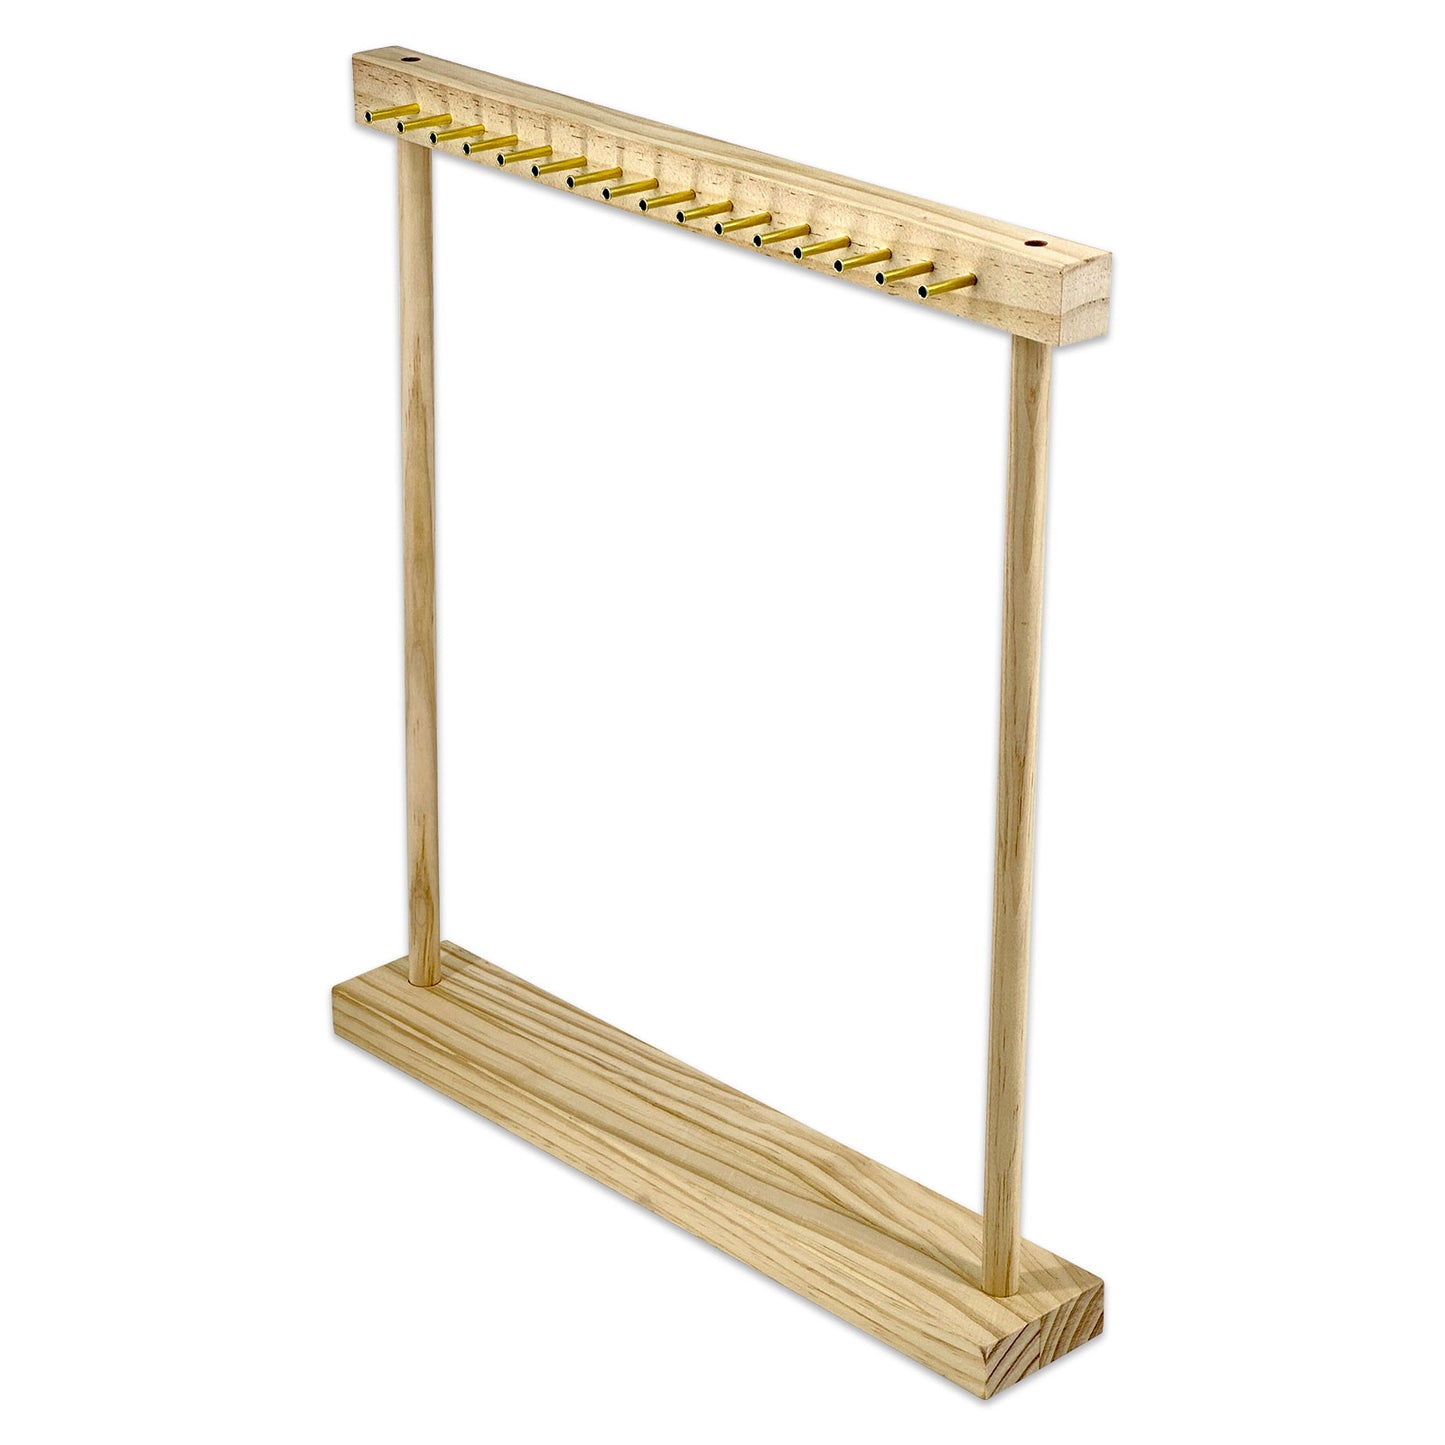 16" x 18" Two-Sided Pine Wood Necklace Display Stand with 32 Pegs